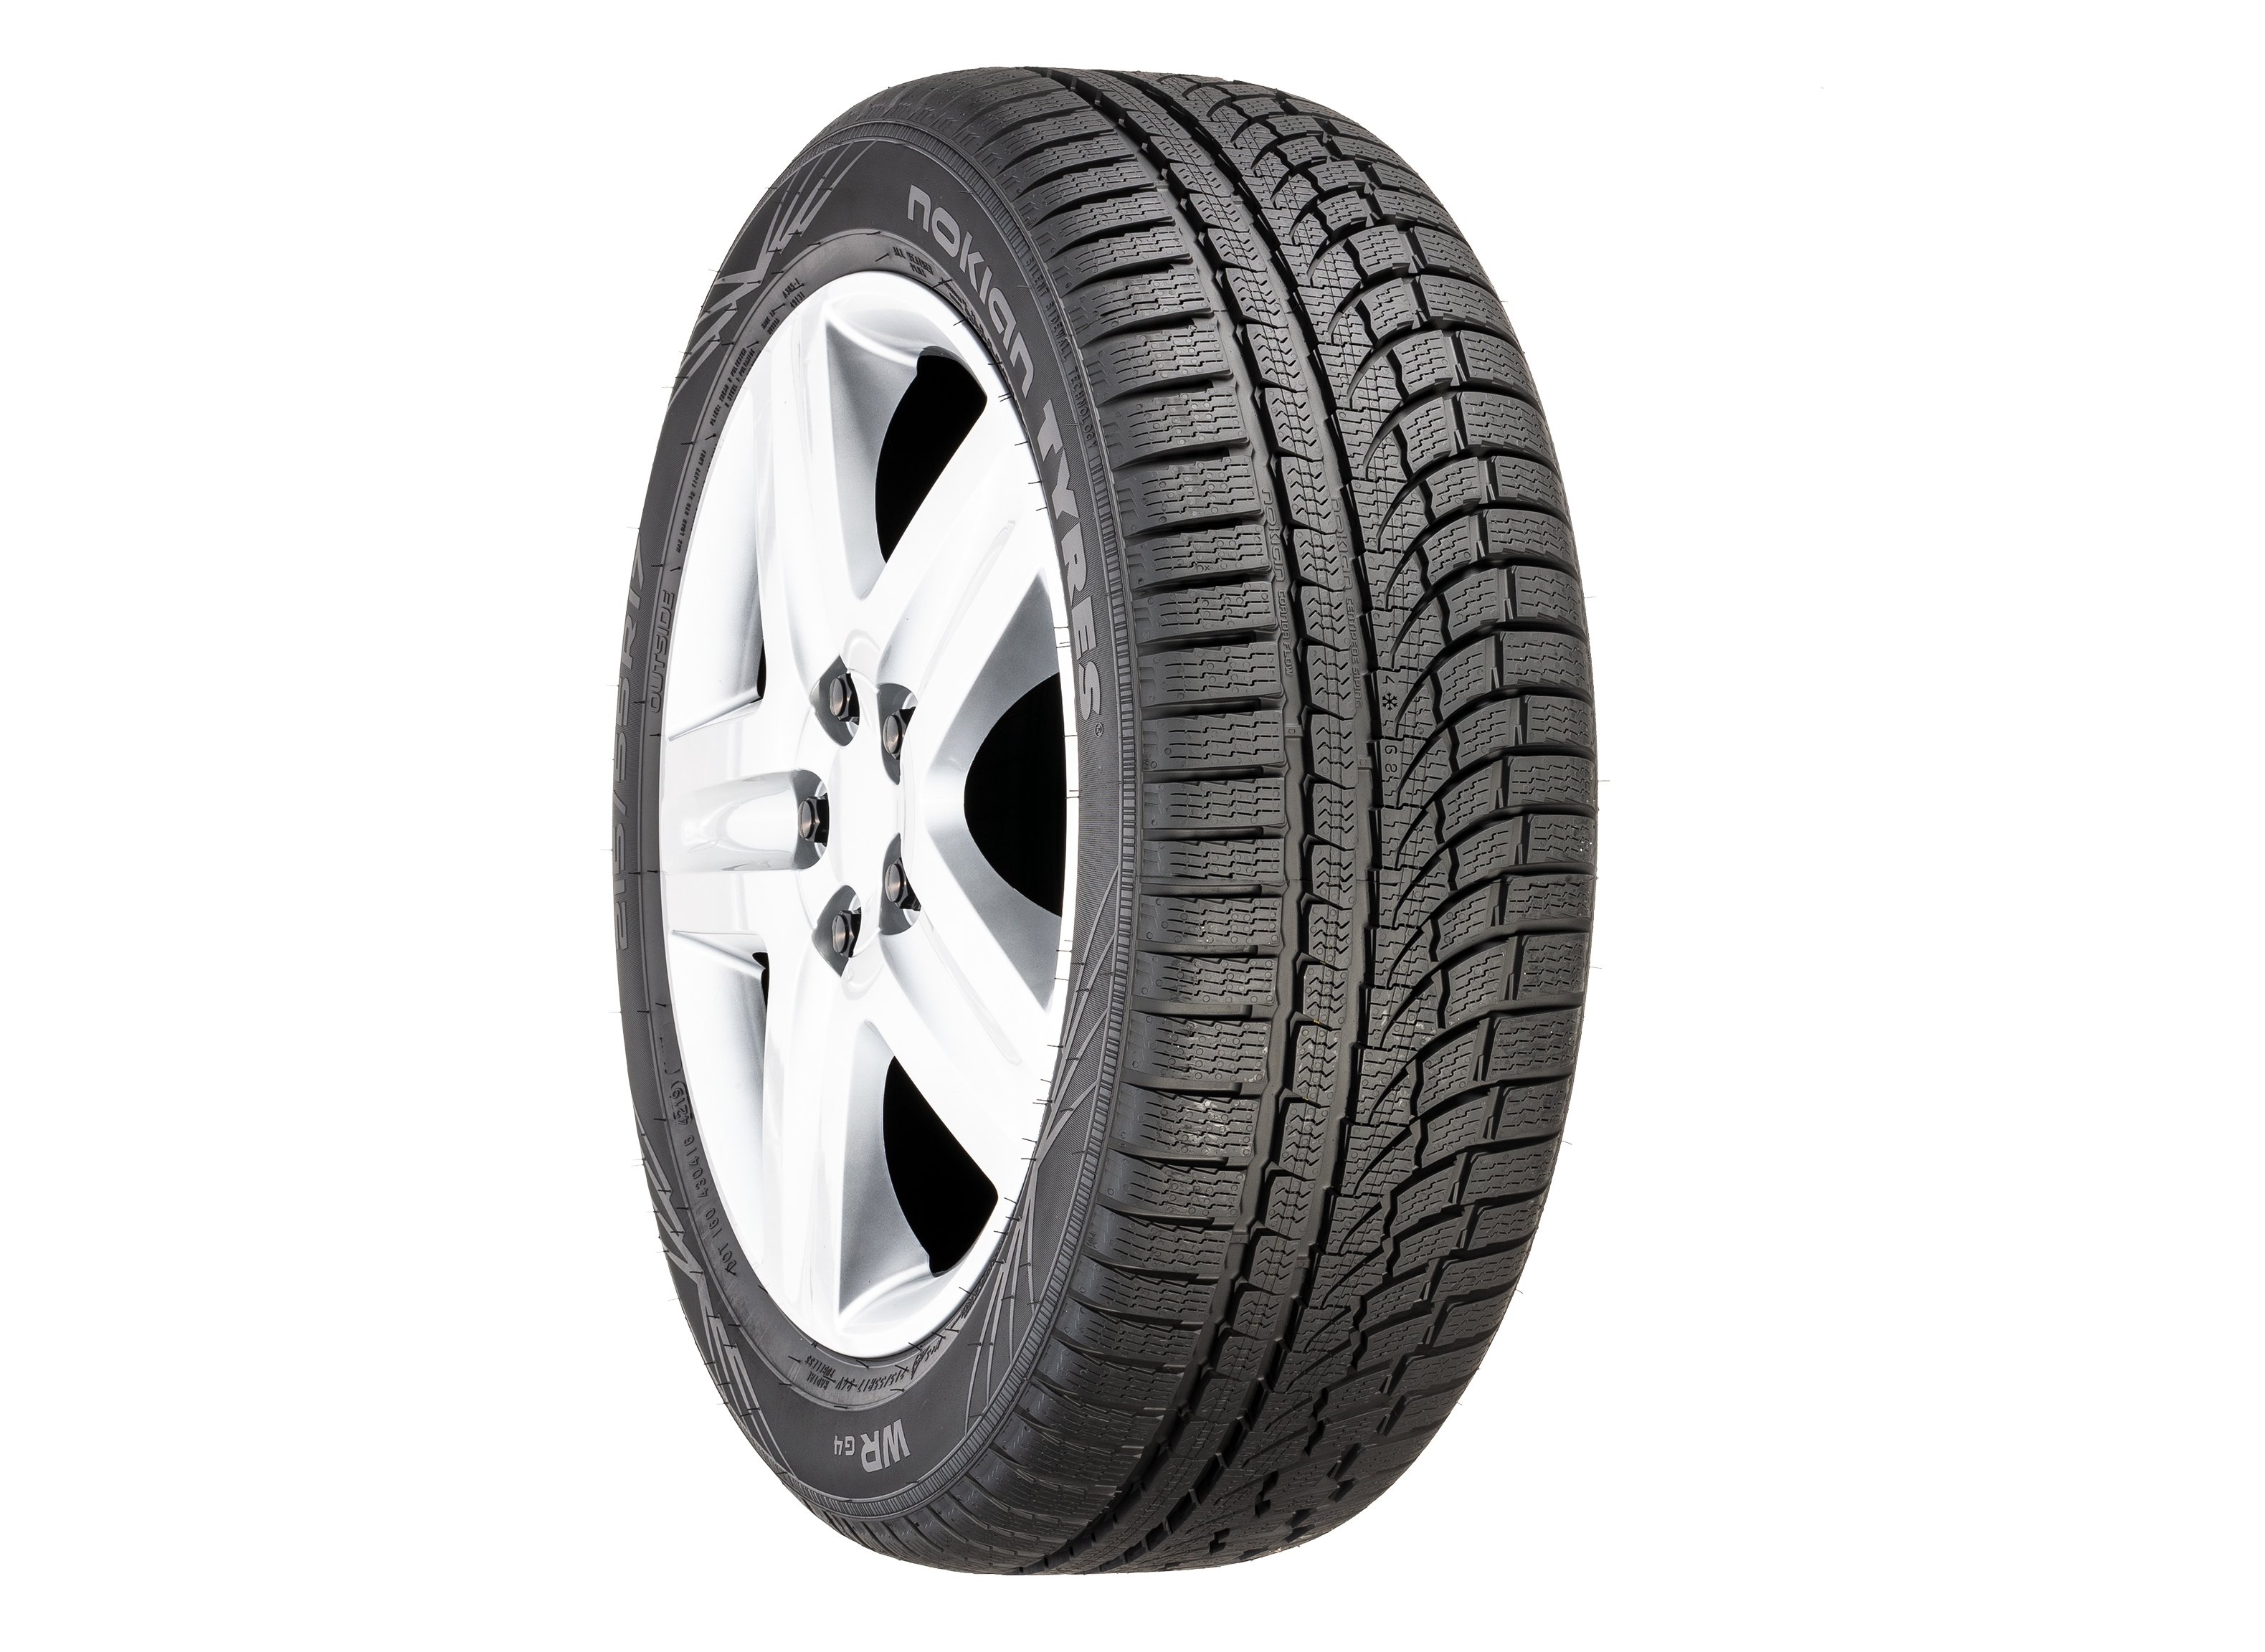 Nokian WRG4 Tire Review - Consumer Reports